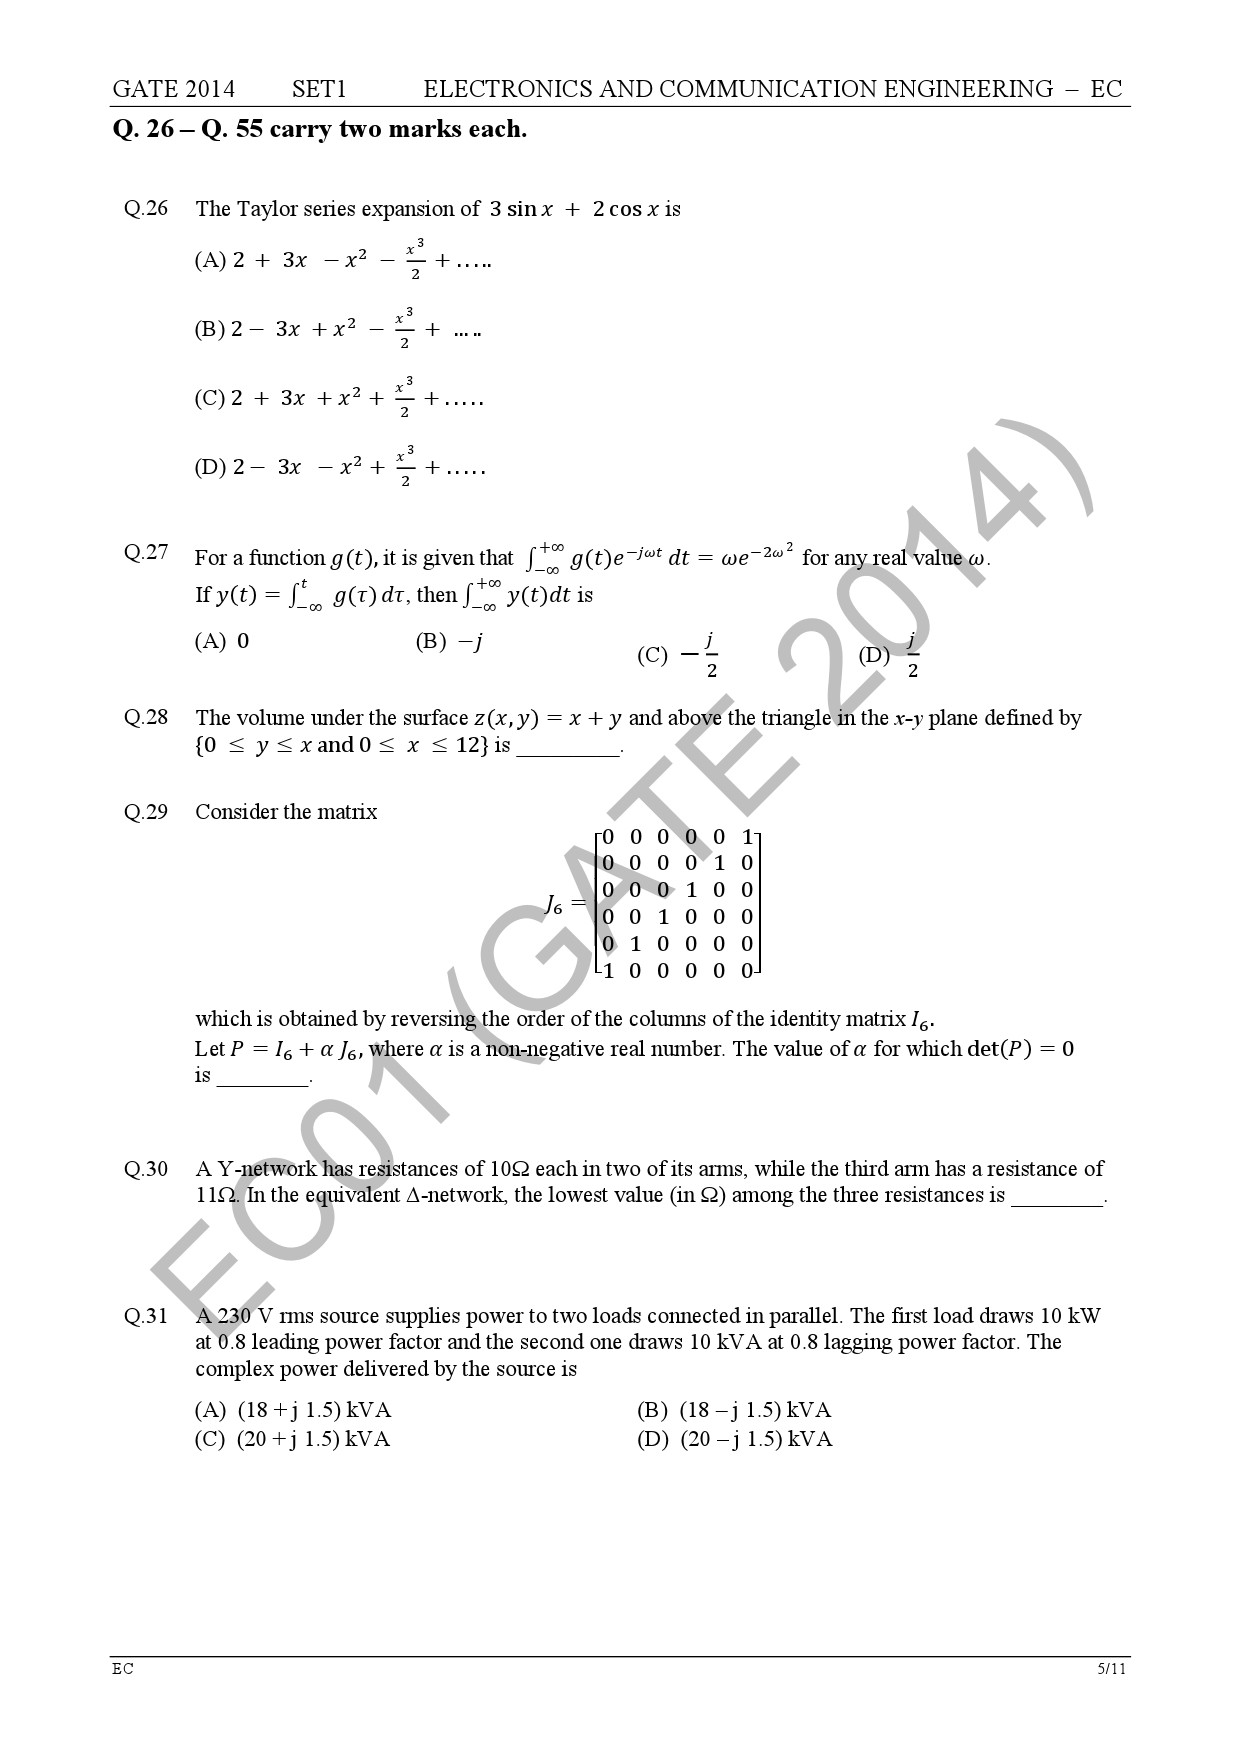 GATE Exam Question Paper 2014 Electronics and Communication Engineering Set 1 11